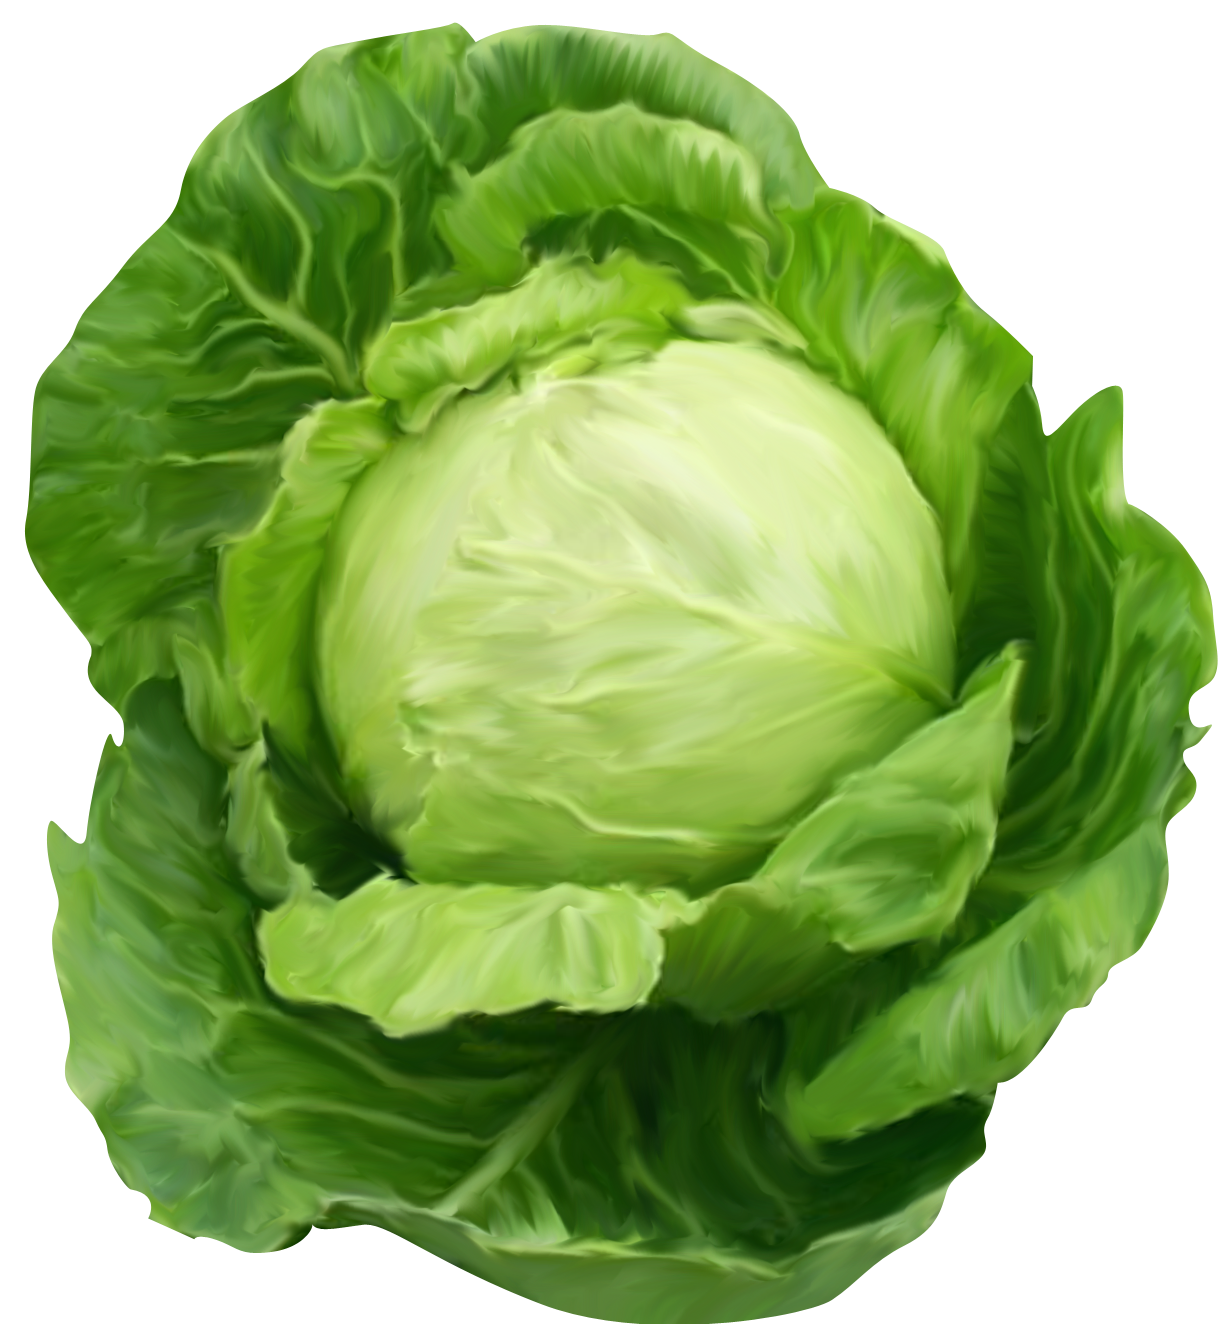 Vegetables clipart cabbage. Picture gallery yopriceville high